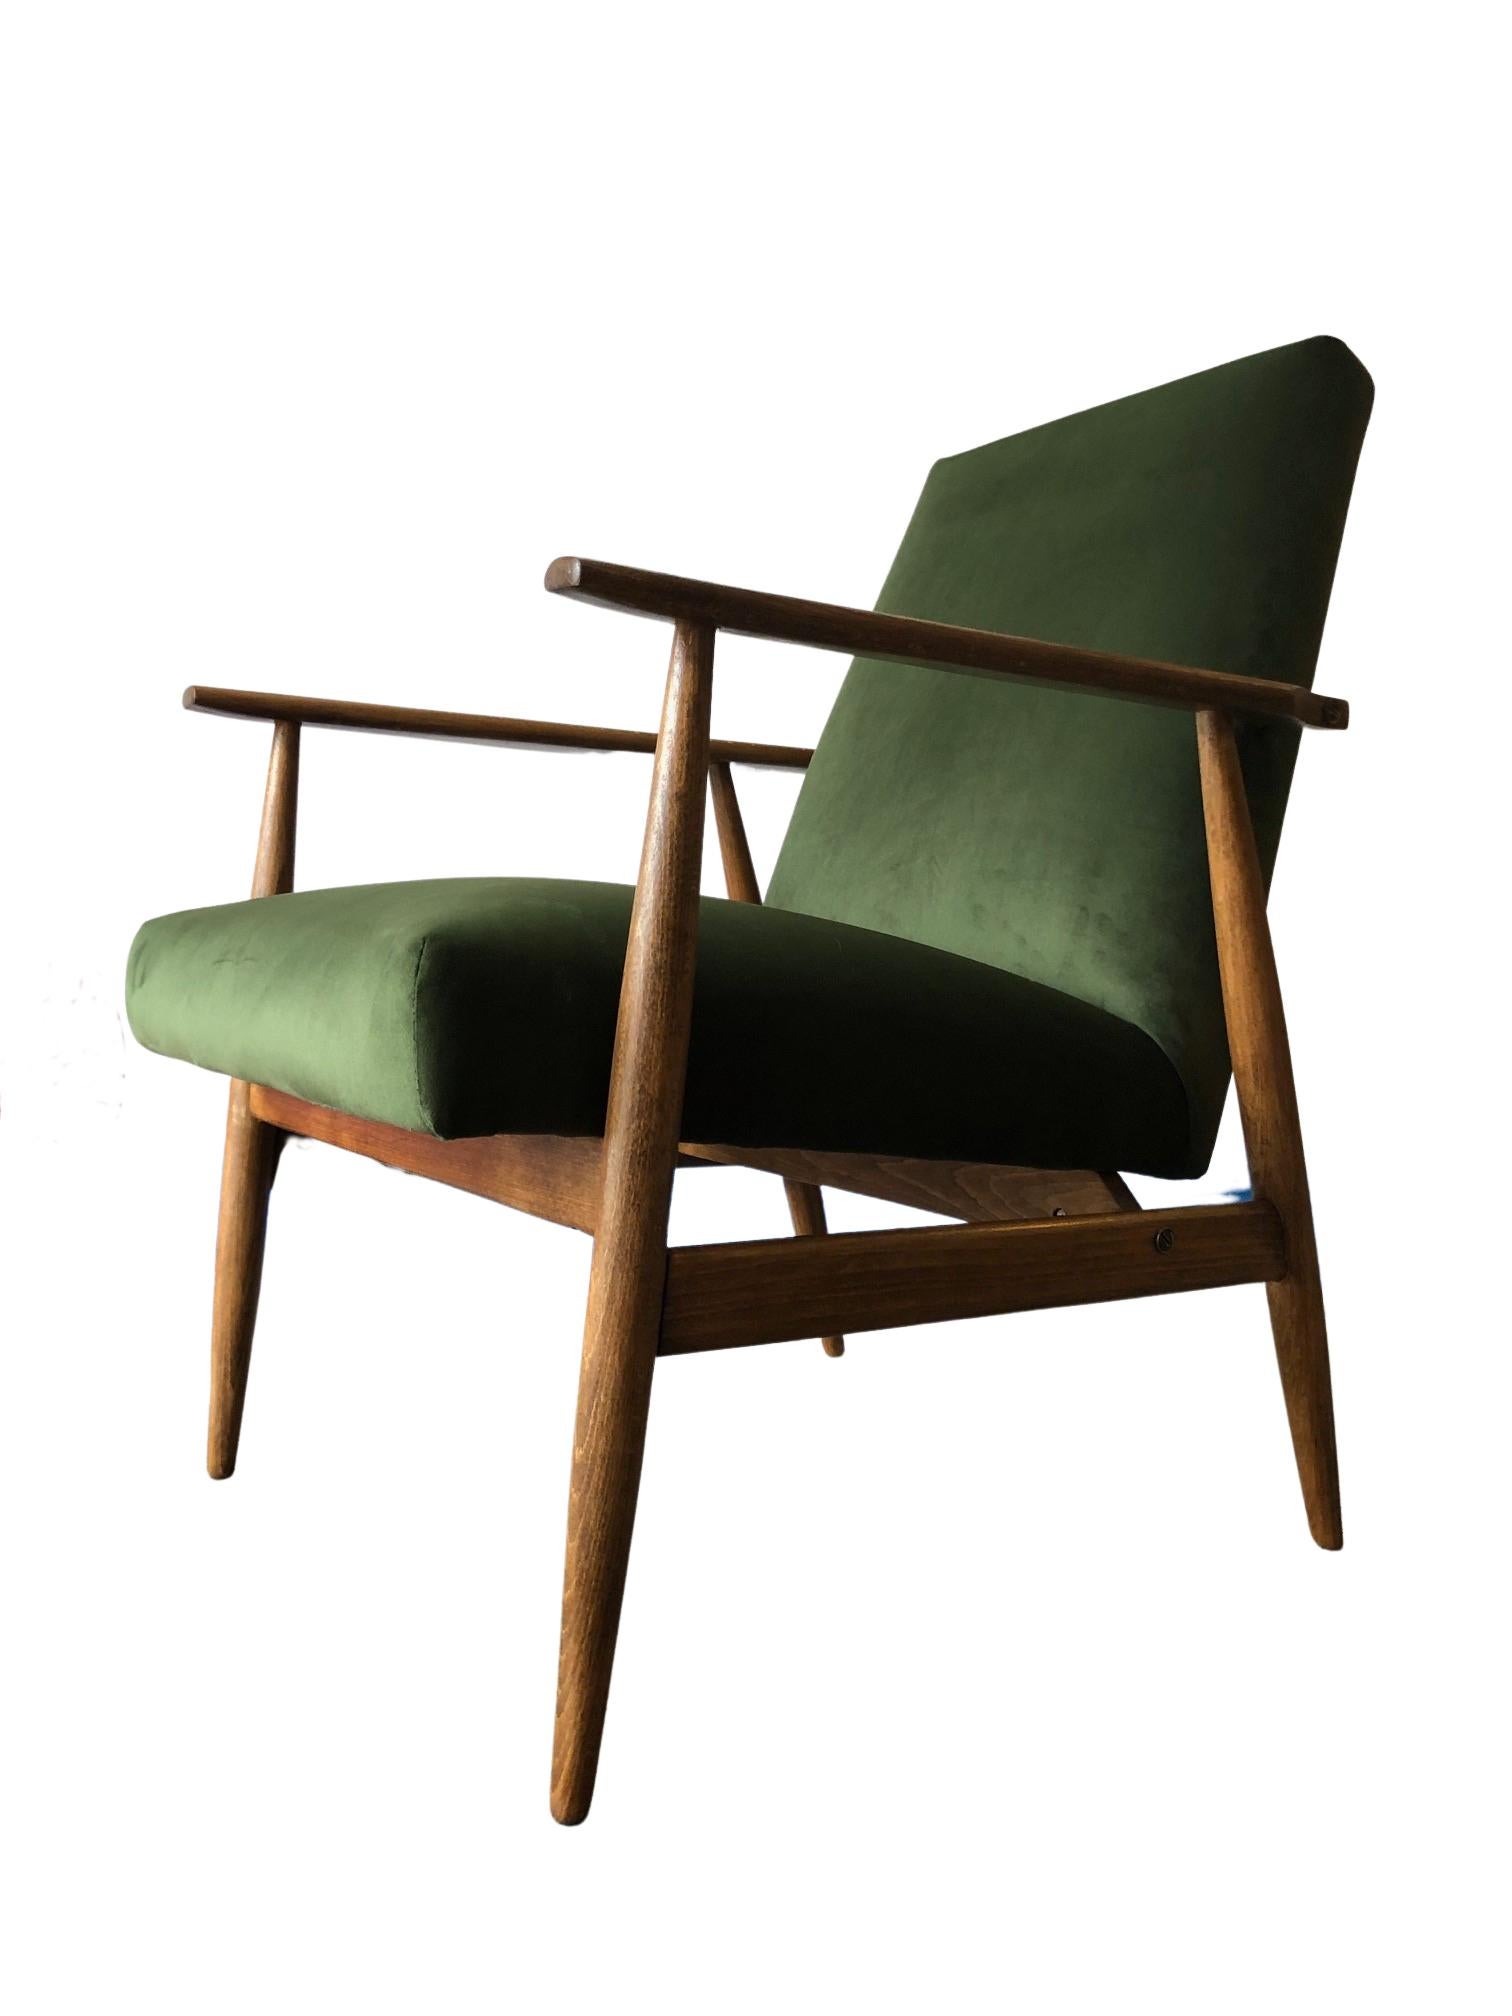 The armchairs designed by Henryk Lis. The structure is made of beech wood in a warm walnut color, finished with a semi-matte satin varnish. The upholstery is high quality velvet in a beautiful green color. The set has been completely restored - both